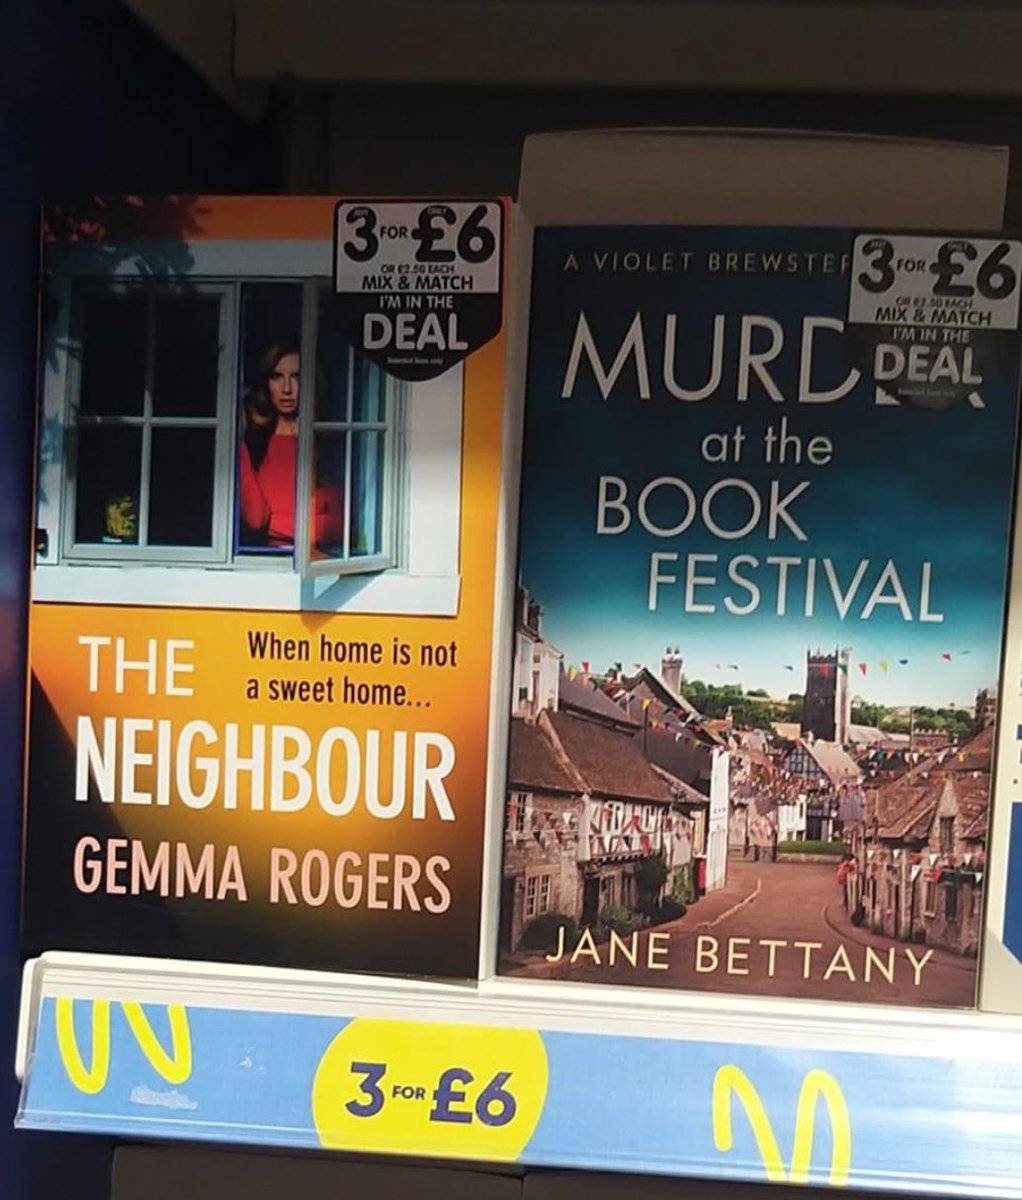 So The Neighbour has hit The Works stores across the country… have you seen it in your local yet? #thriller #newbooks #TheNeighbour #theworks